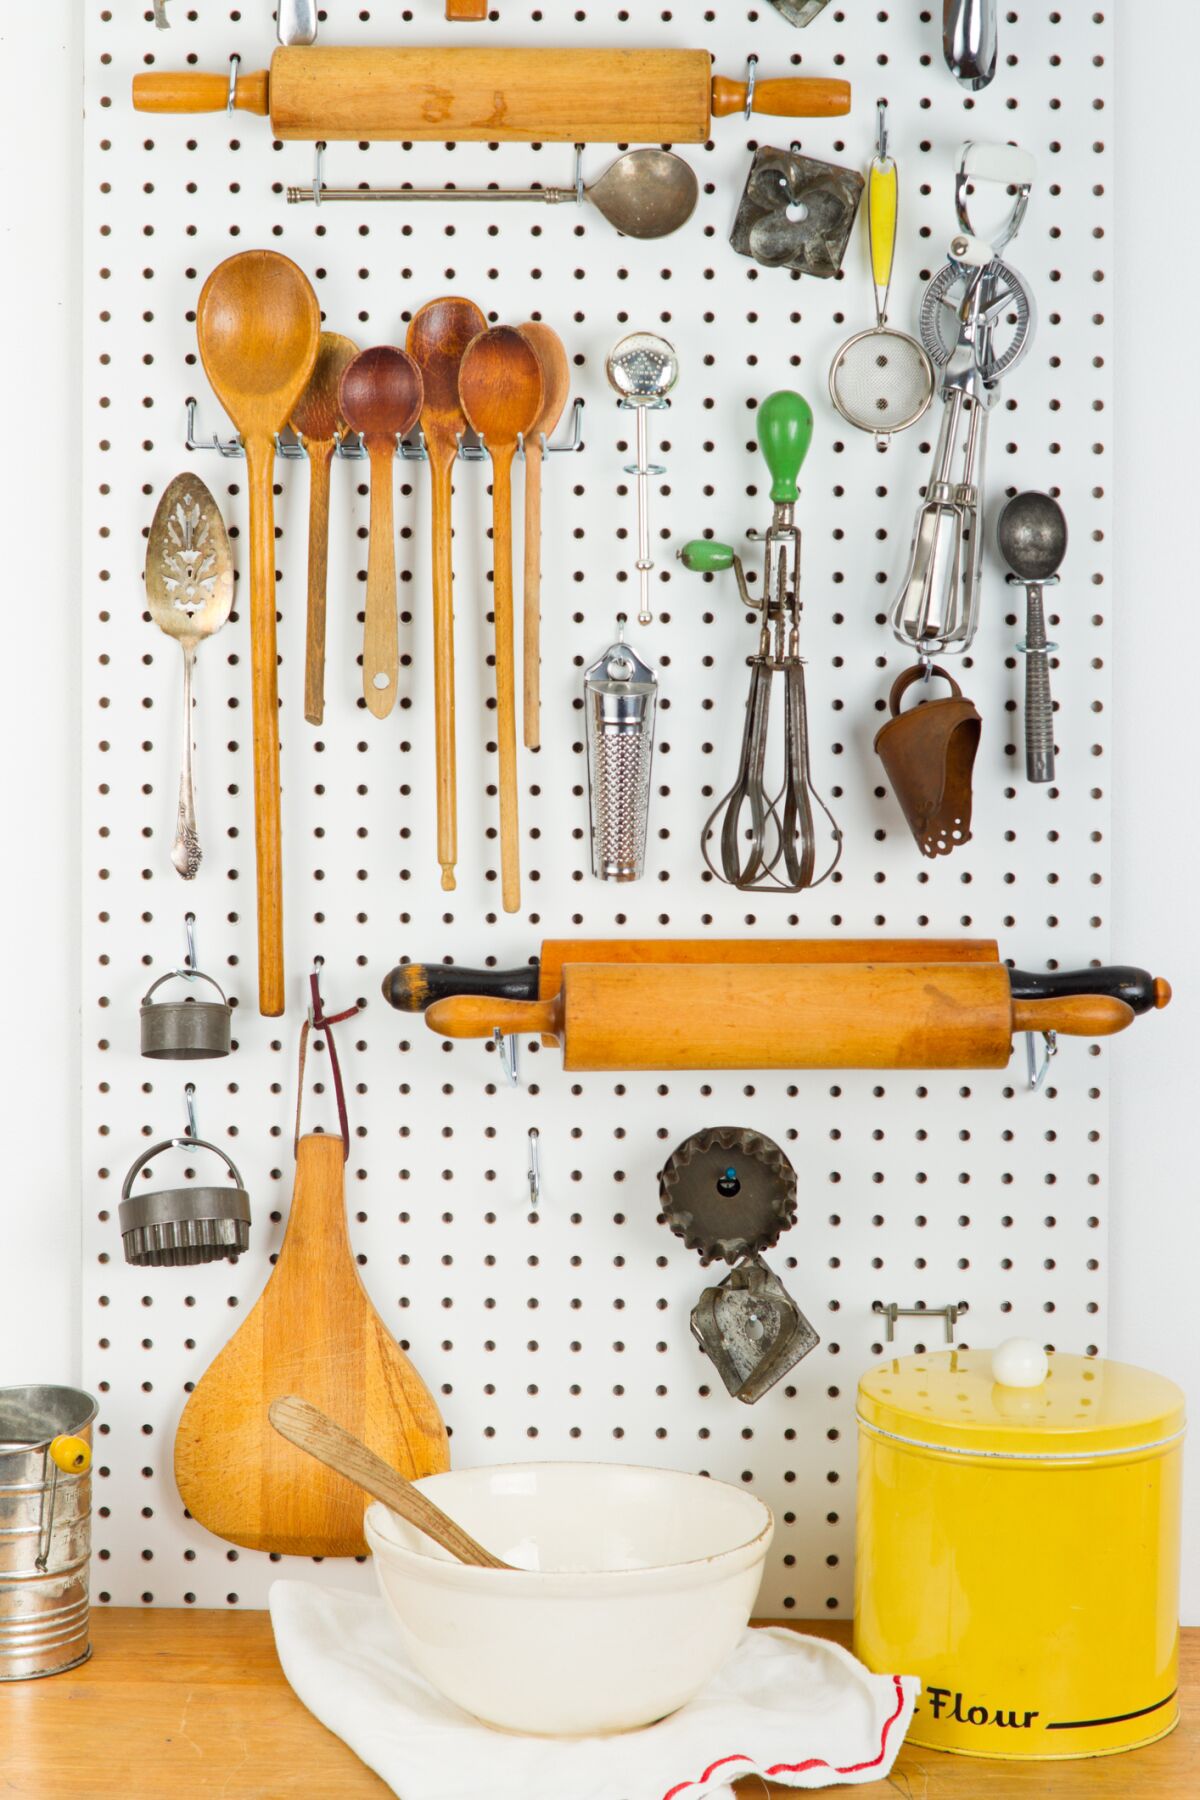 A peg board in the kitchen is a good way to display vintage baking utensils.